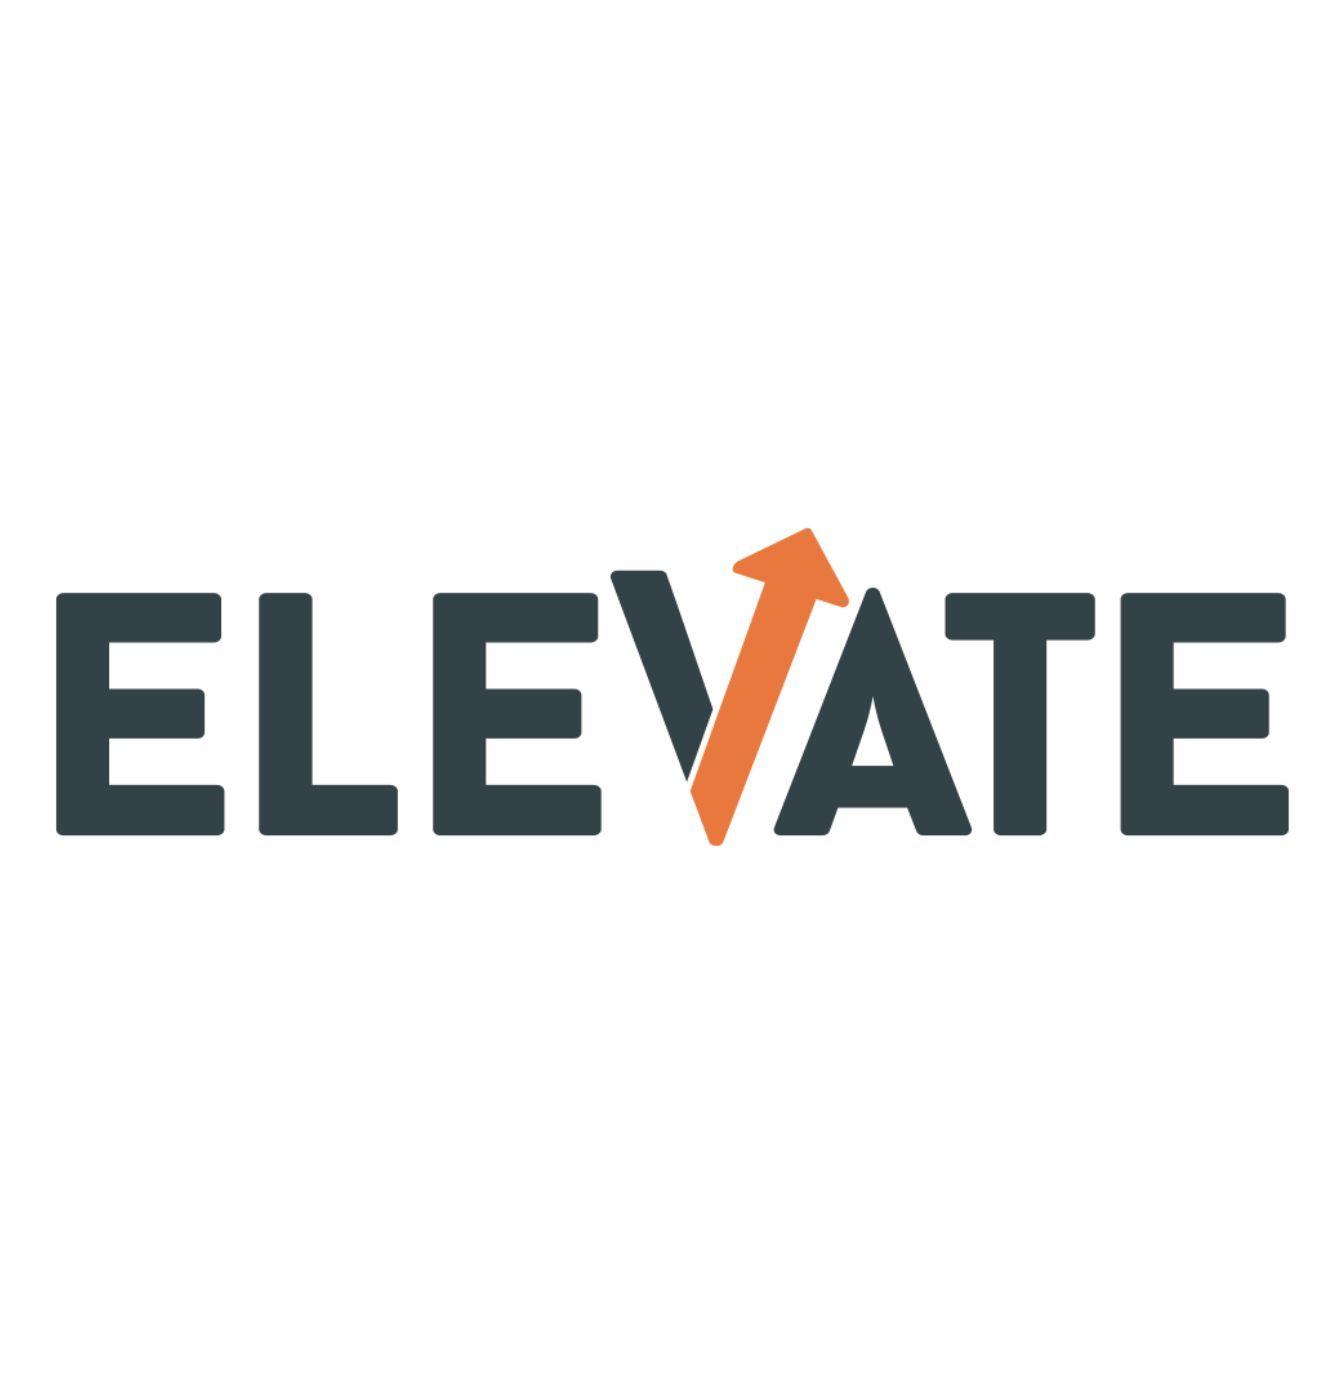 Wall of Fame Logo - Elevate. Wall of Fame